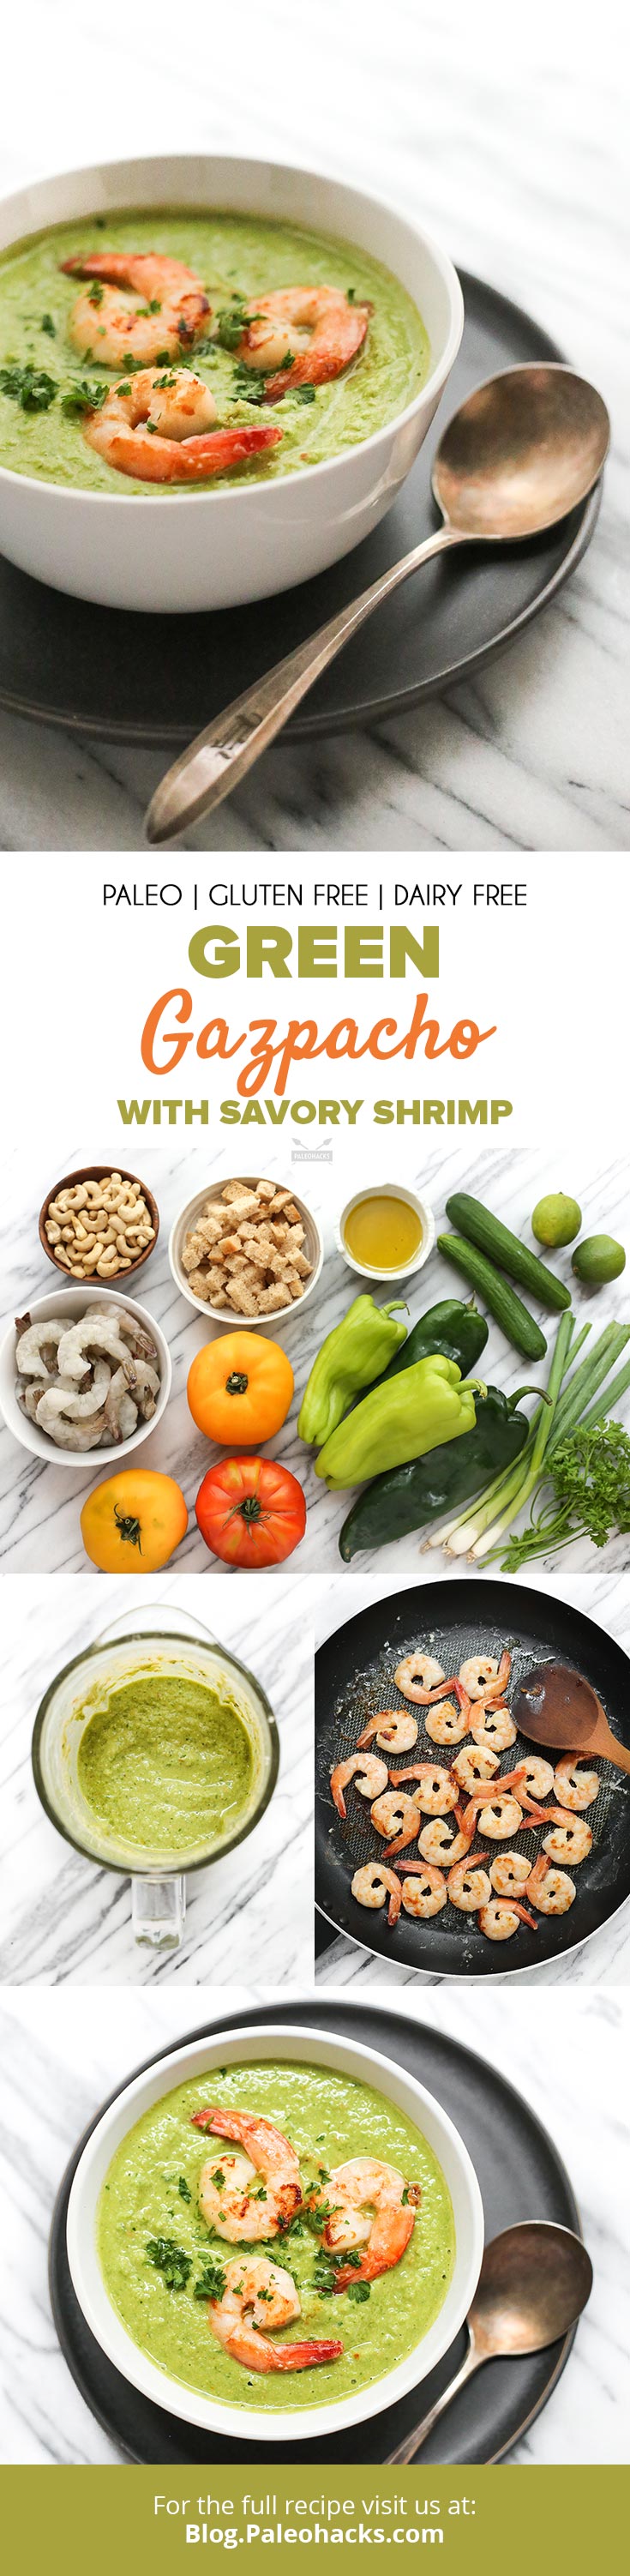 Serve this Green Gazpacho with Shrimp whenever it's too hot outside for soup. It's the perfect combination of hearty and refreshing!